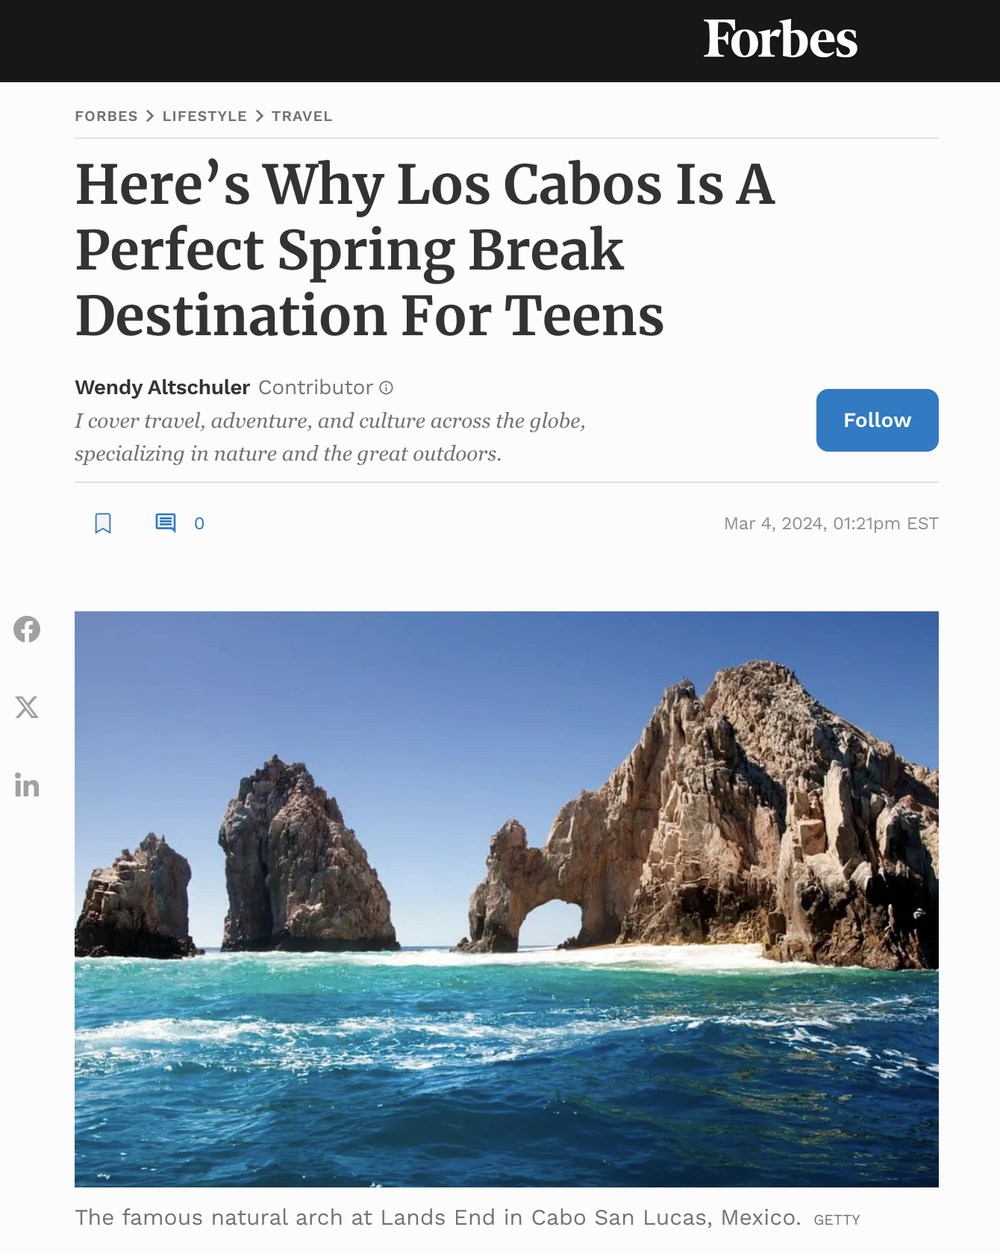 Here’s Why Los Cabos Is A Perfect Spring Break Destination For Teens